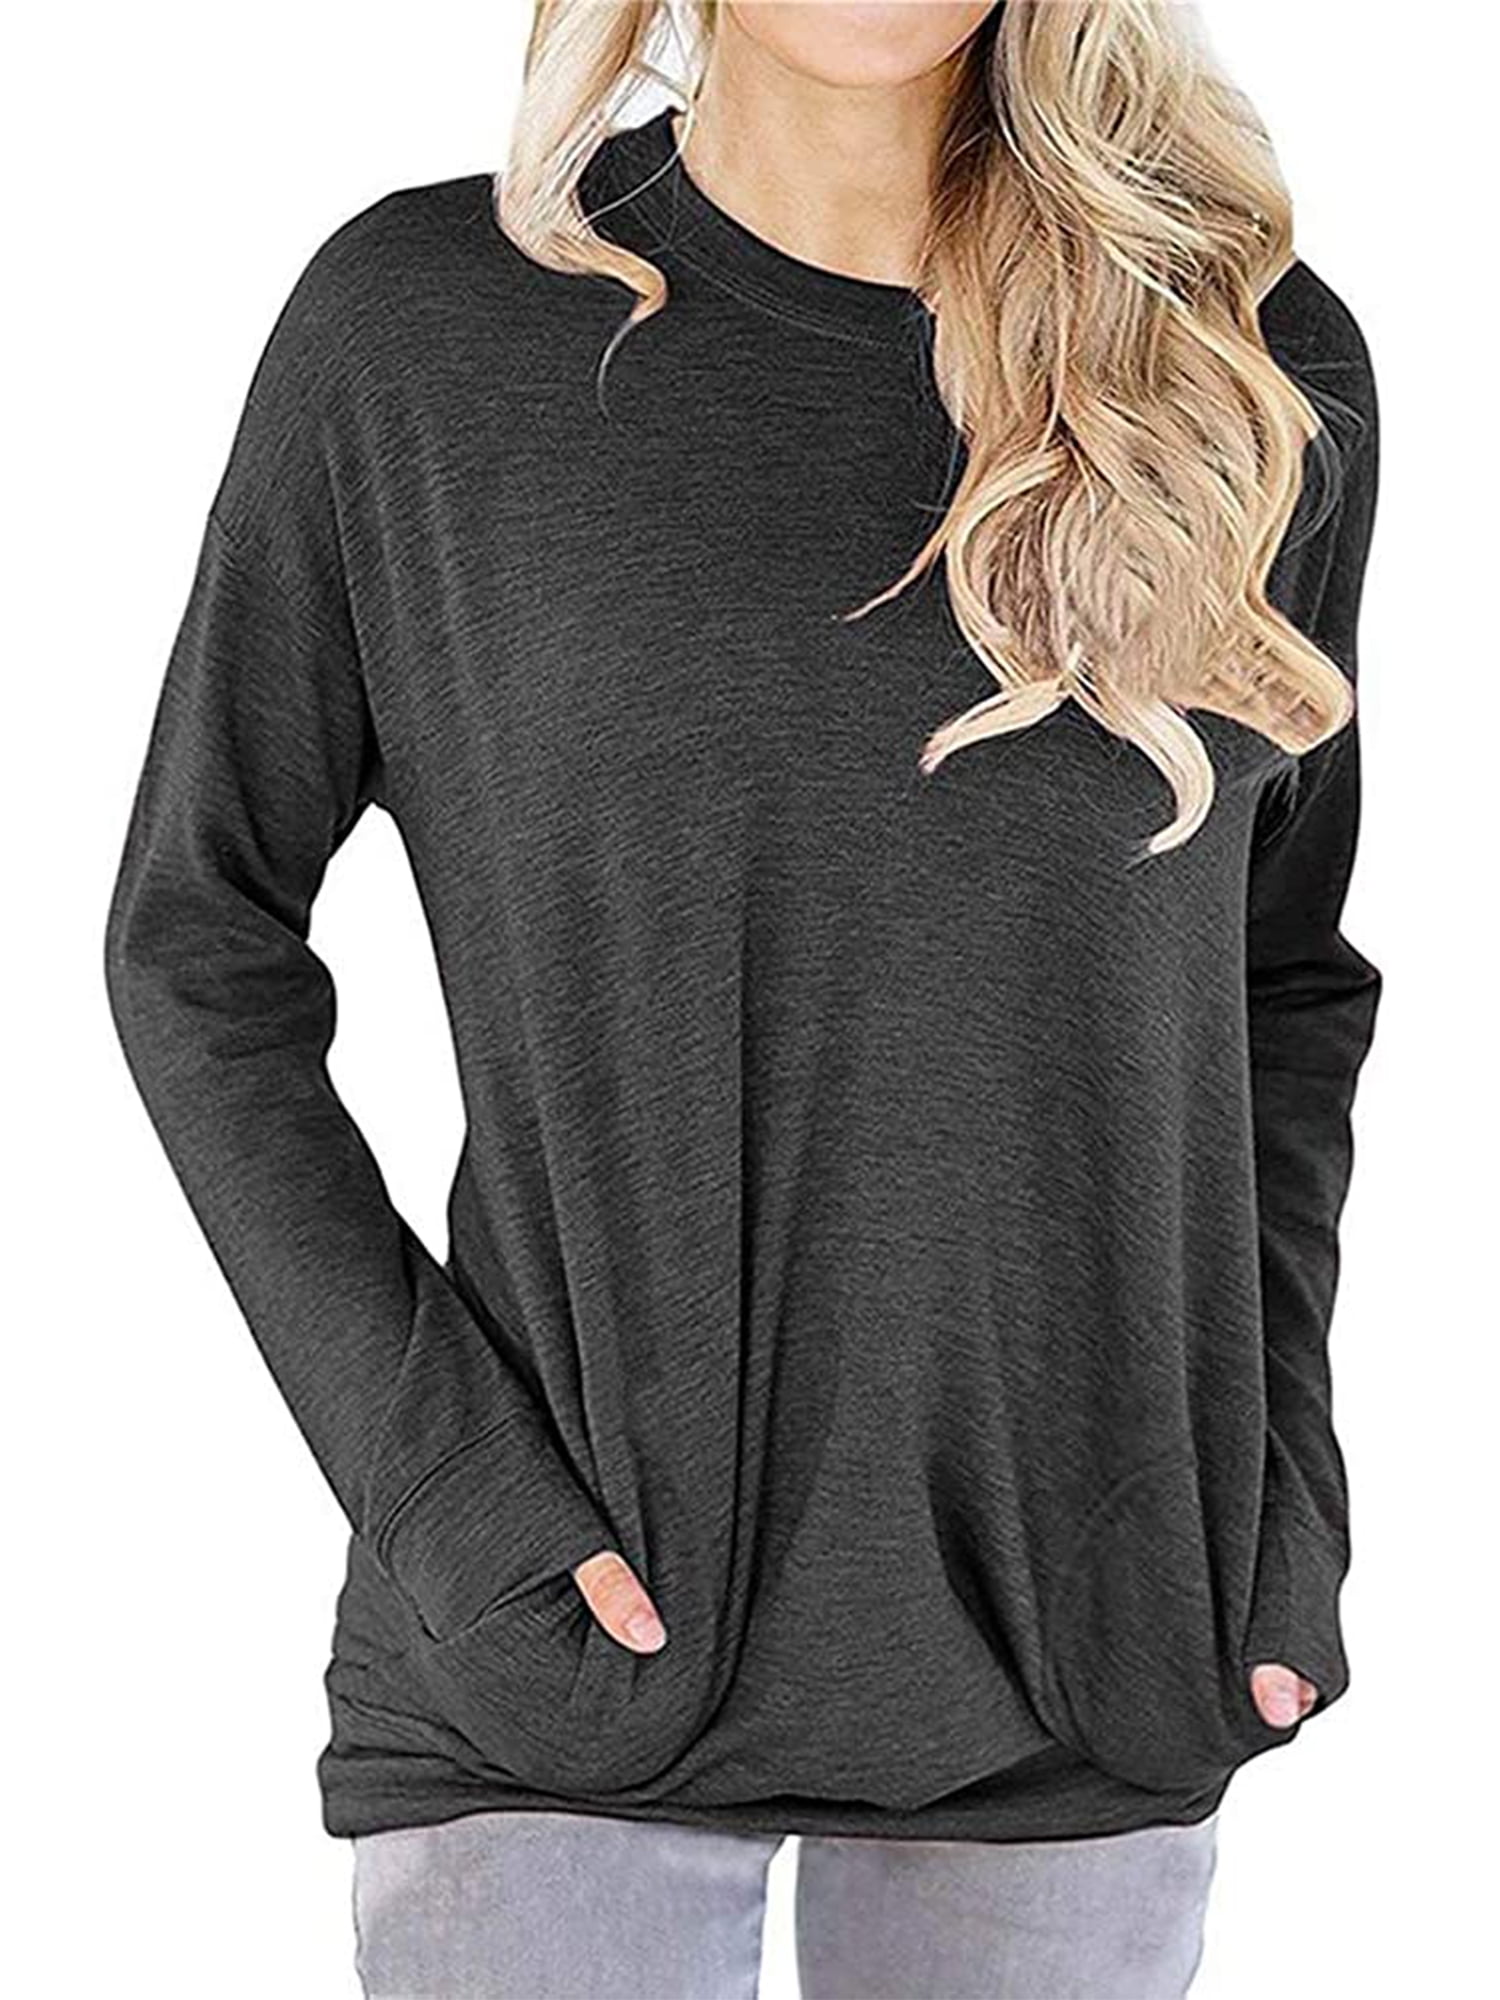 Womens Plus Size Baggy Shirts Long Sleeve Casual Round Neck Baggy ...